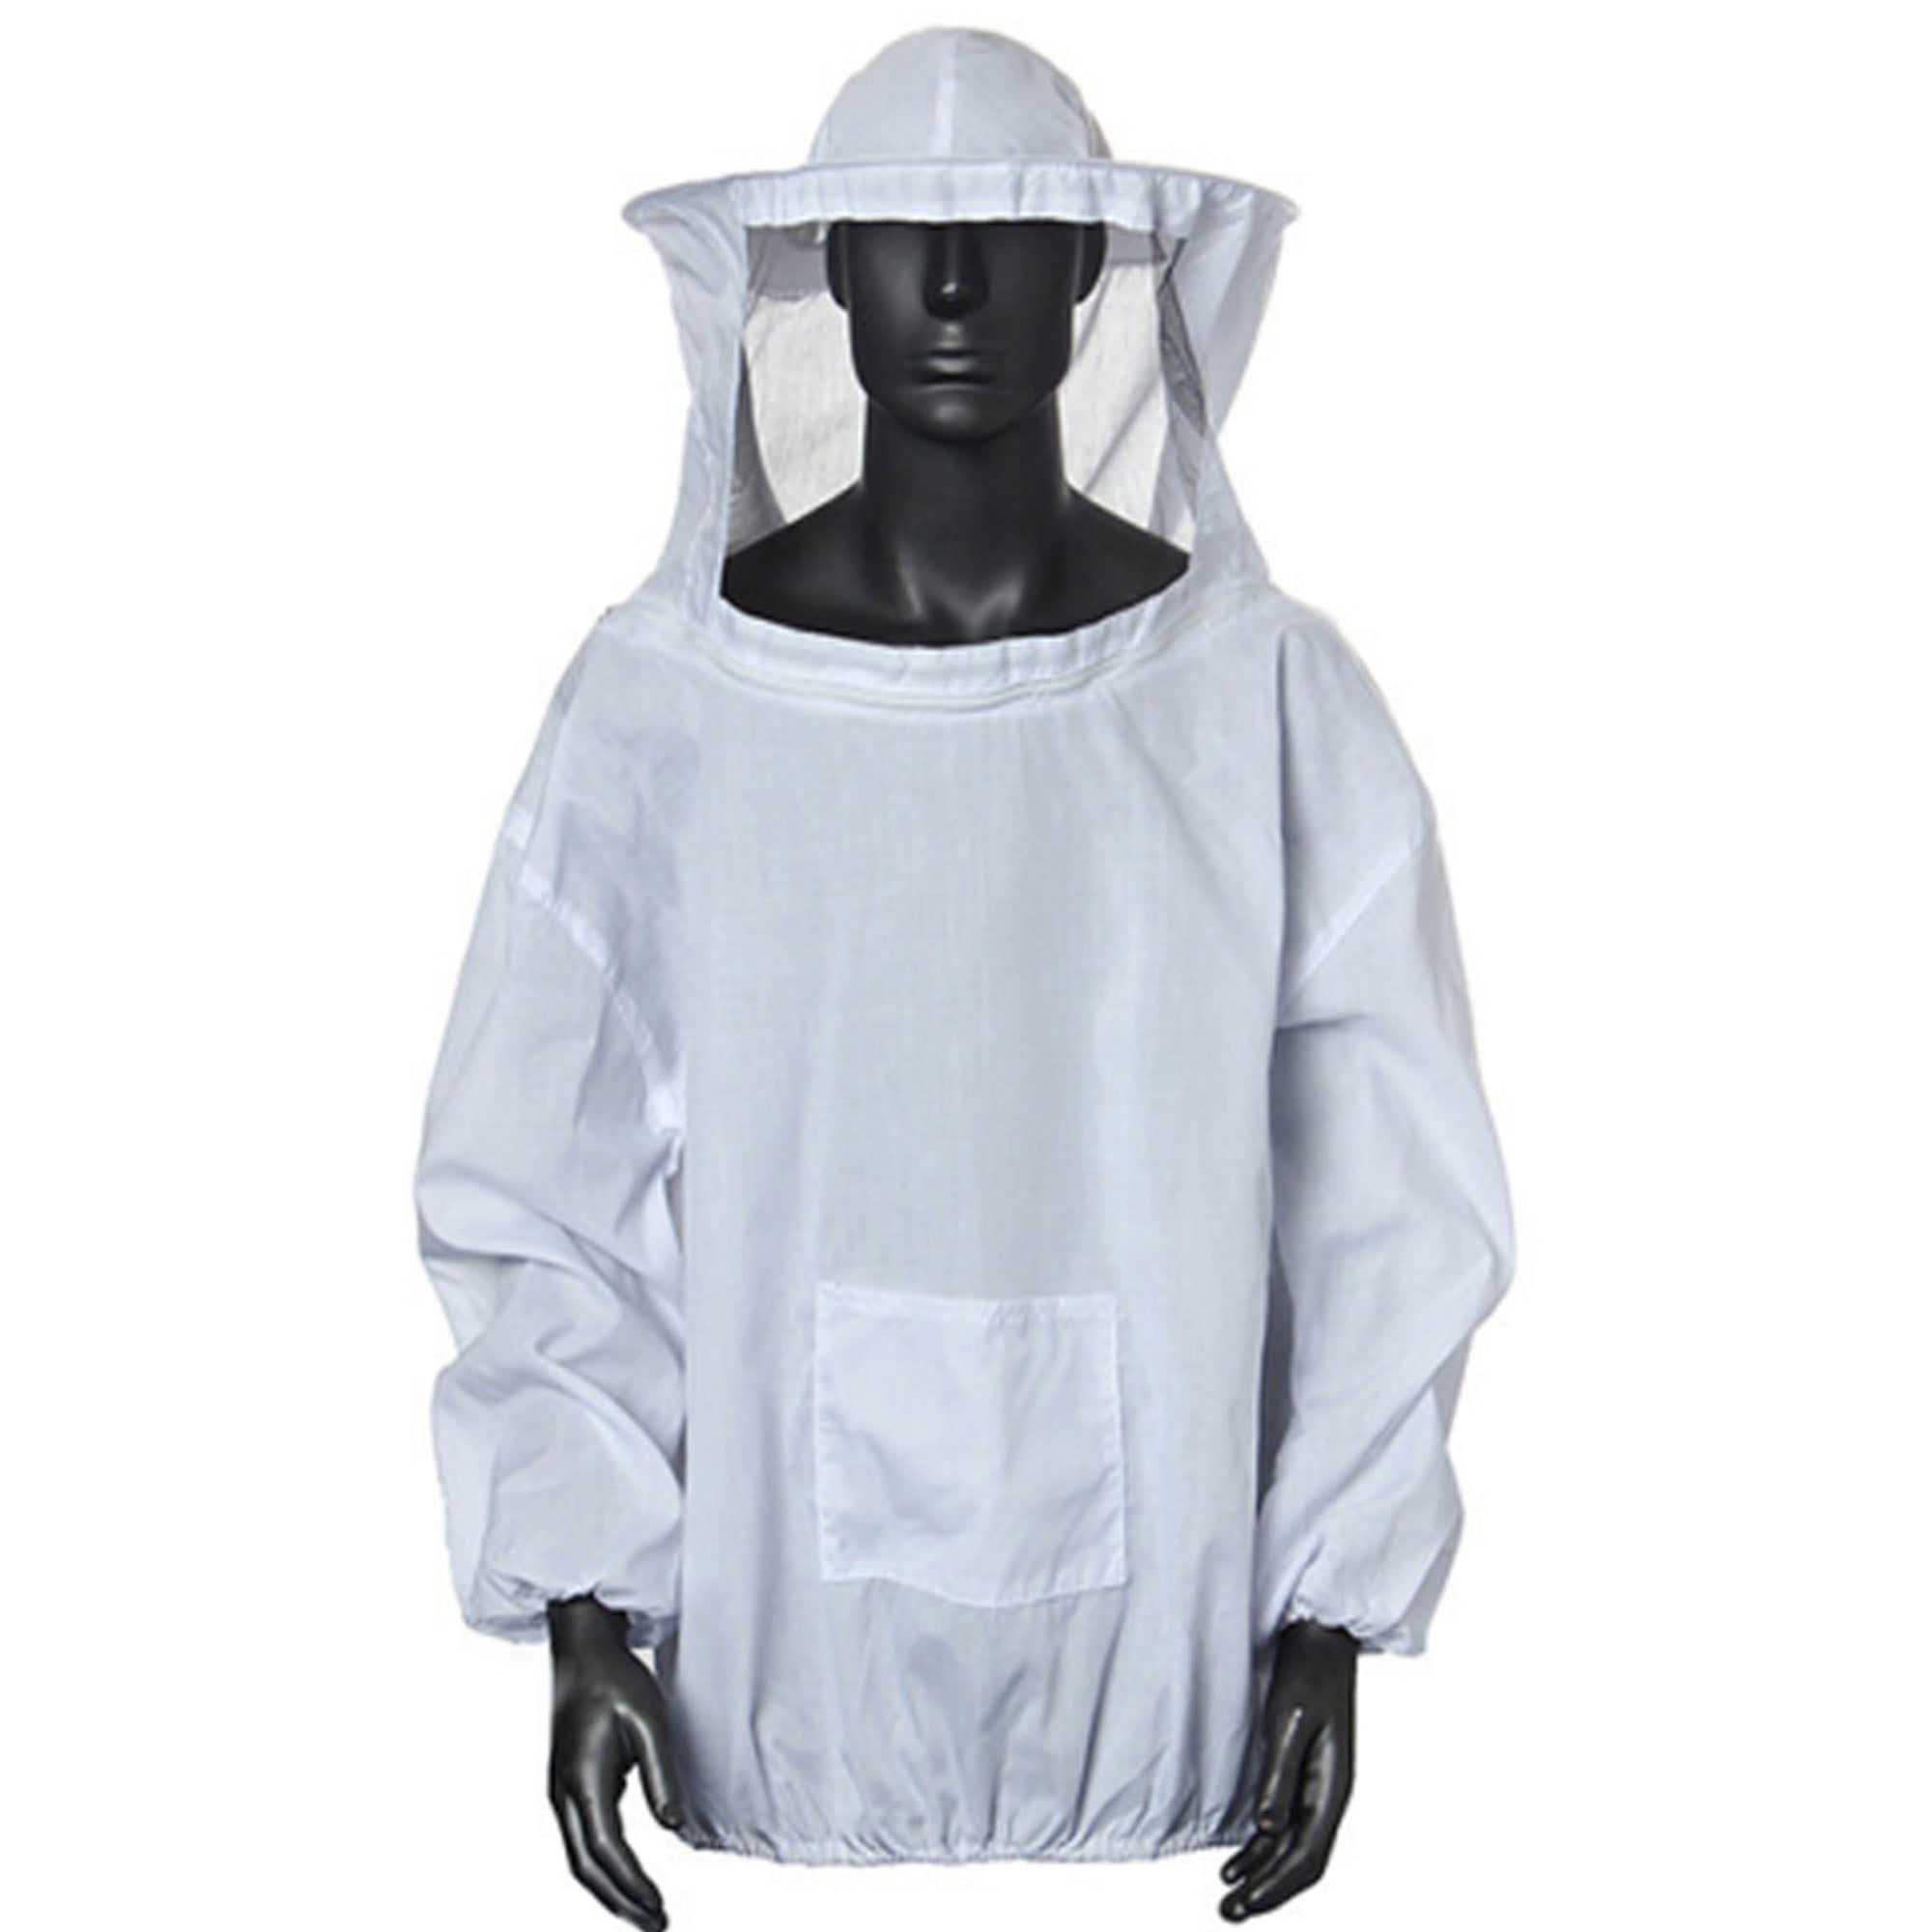 Details about   White Beekeeping Bee Keeping Jacket Veil Suit Dress Smock Protective Gloves 